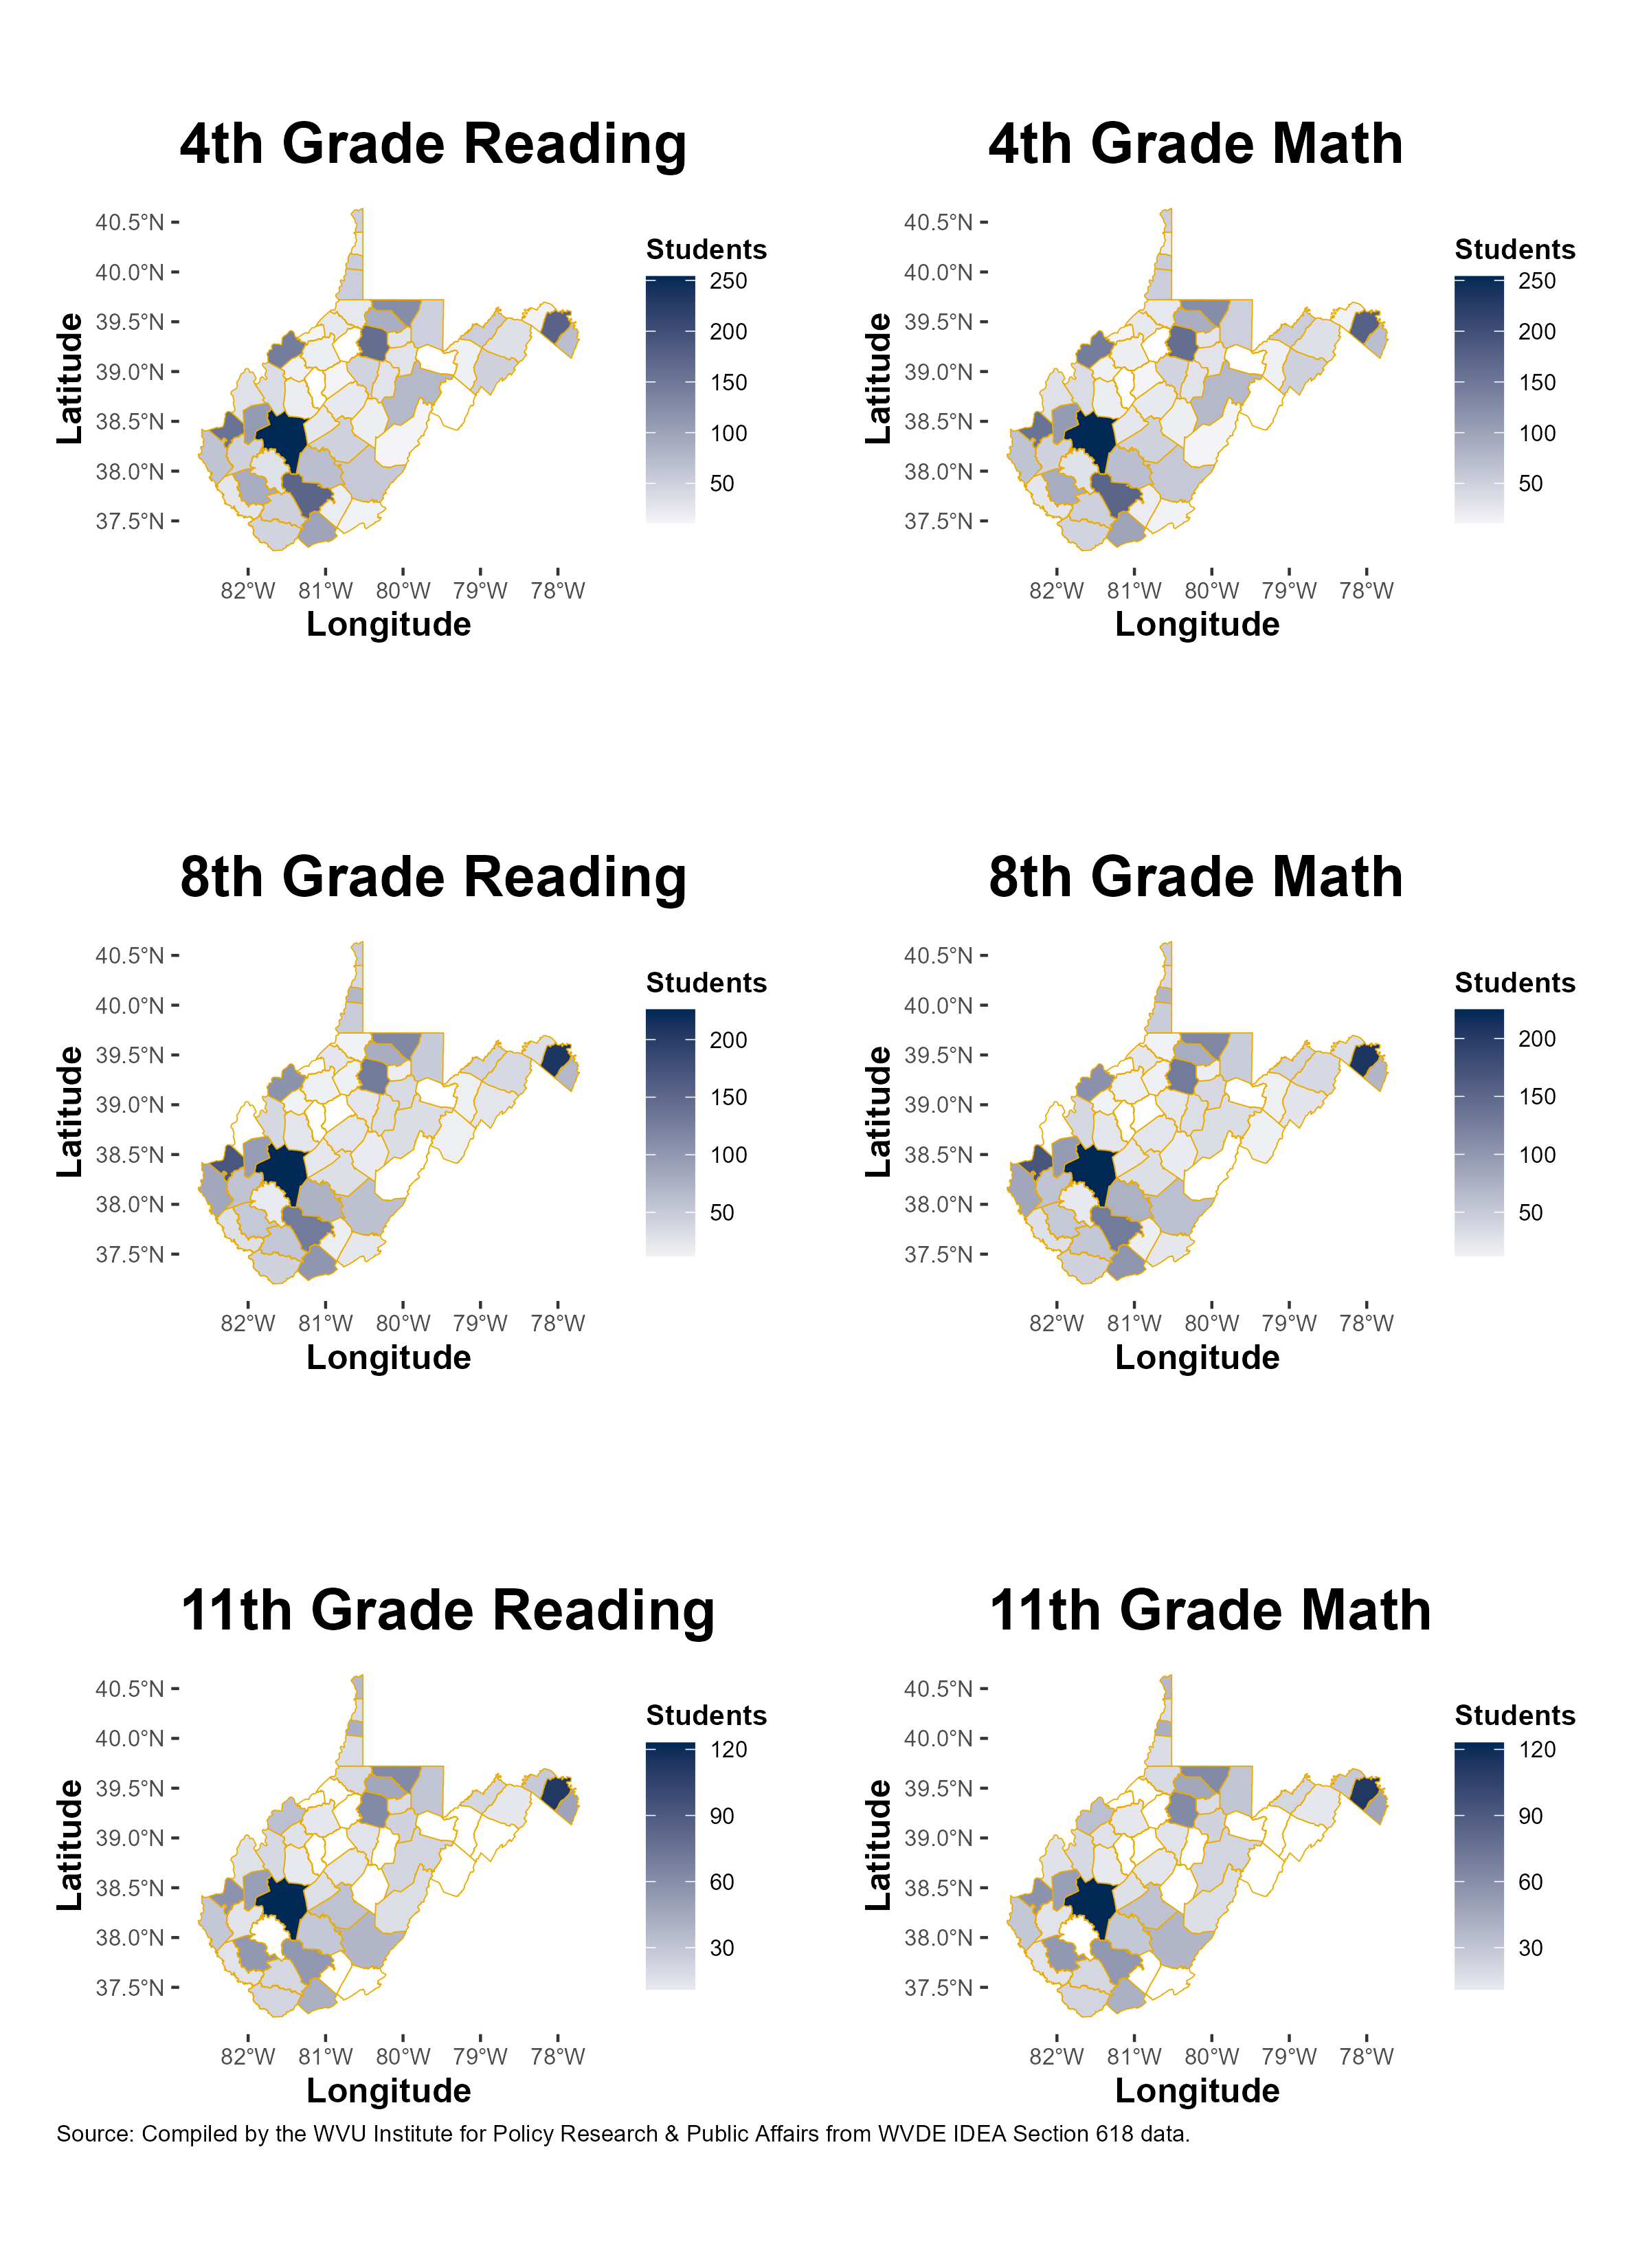 Figure 9: Three sets of chloropleth county maps for reading and math in fourth, eighth, and eleventh grades.